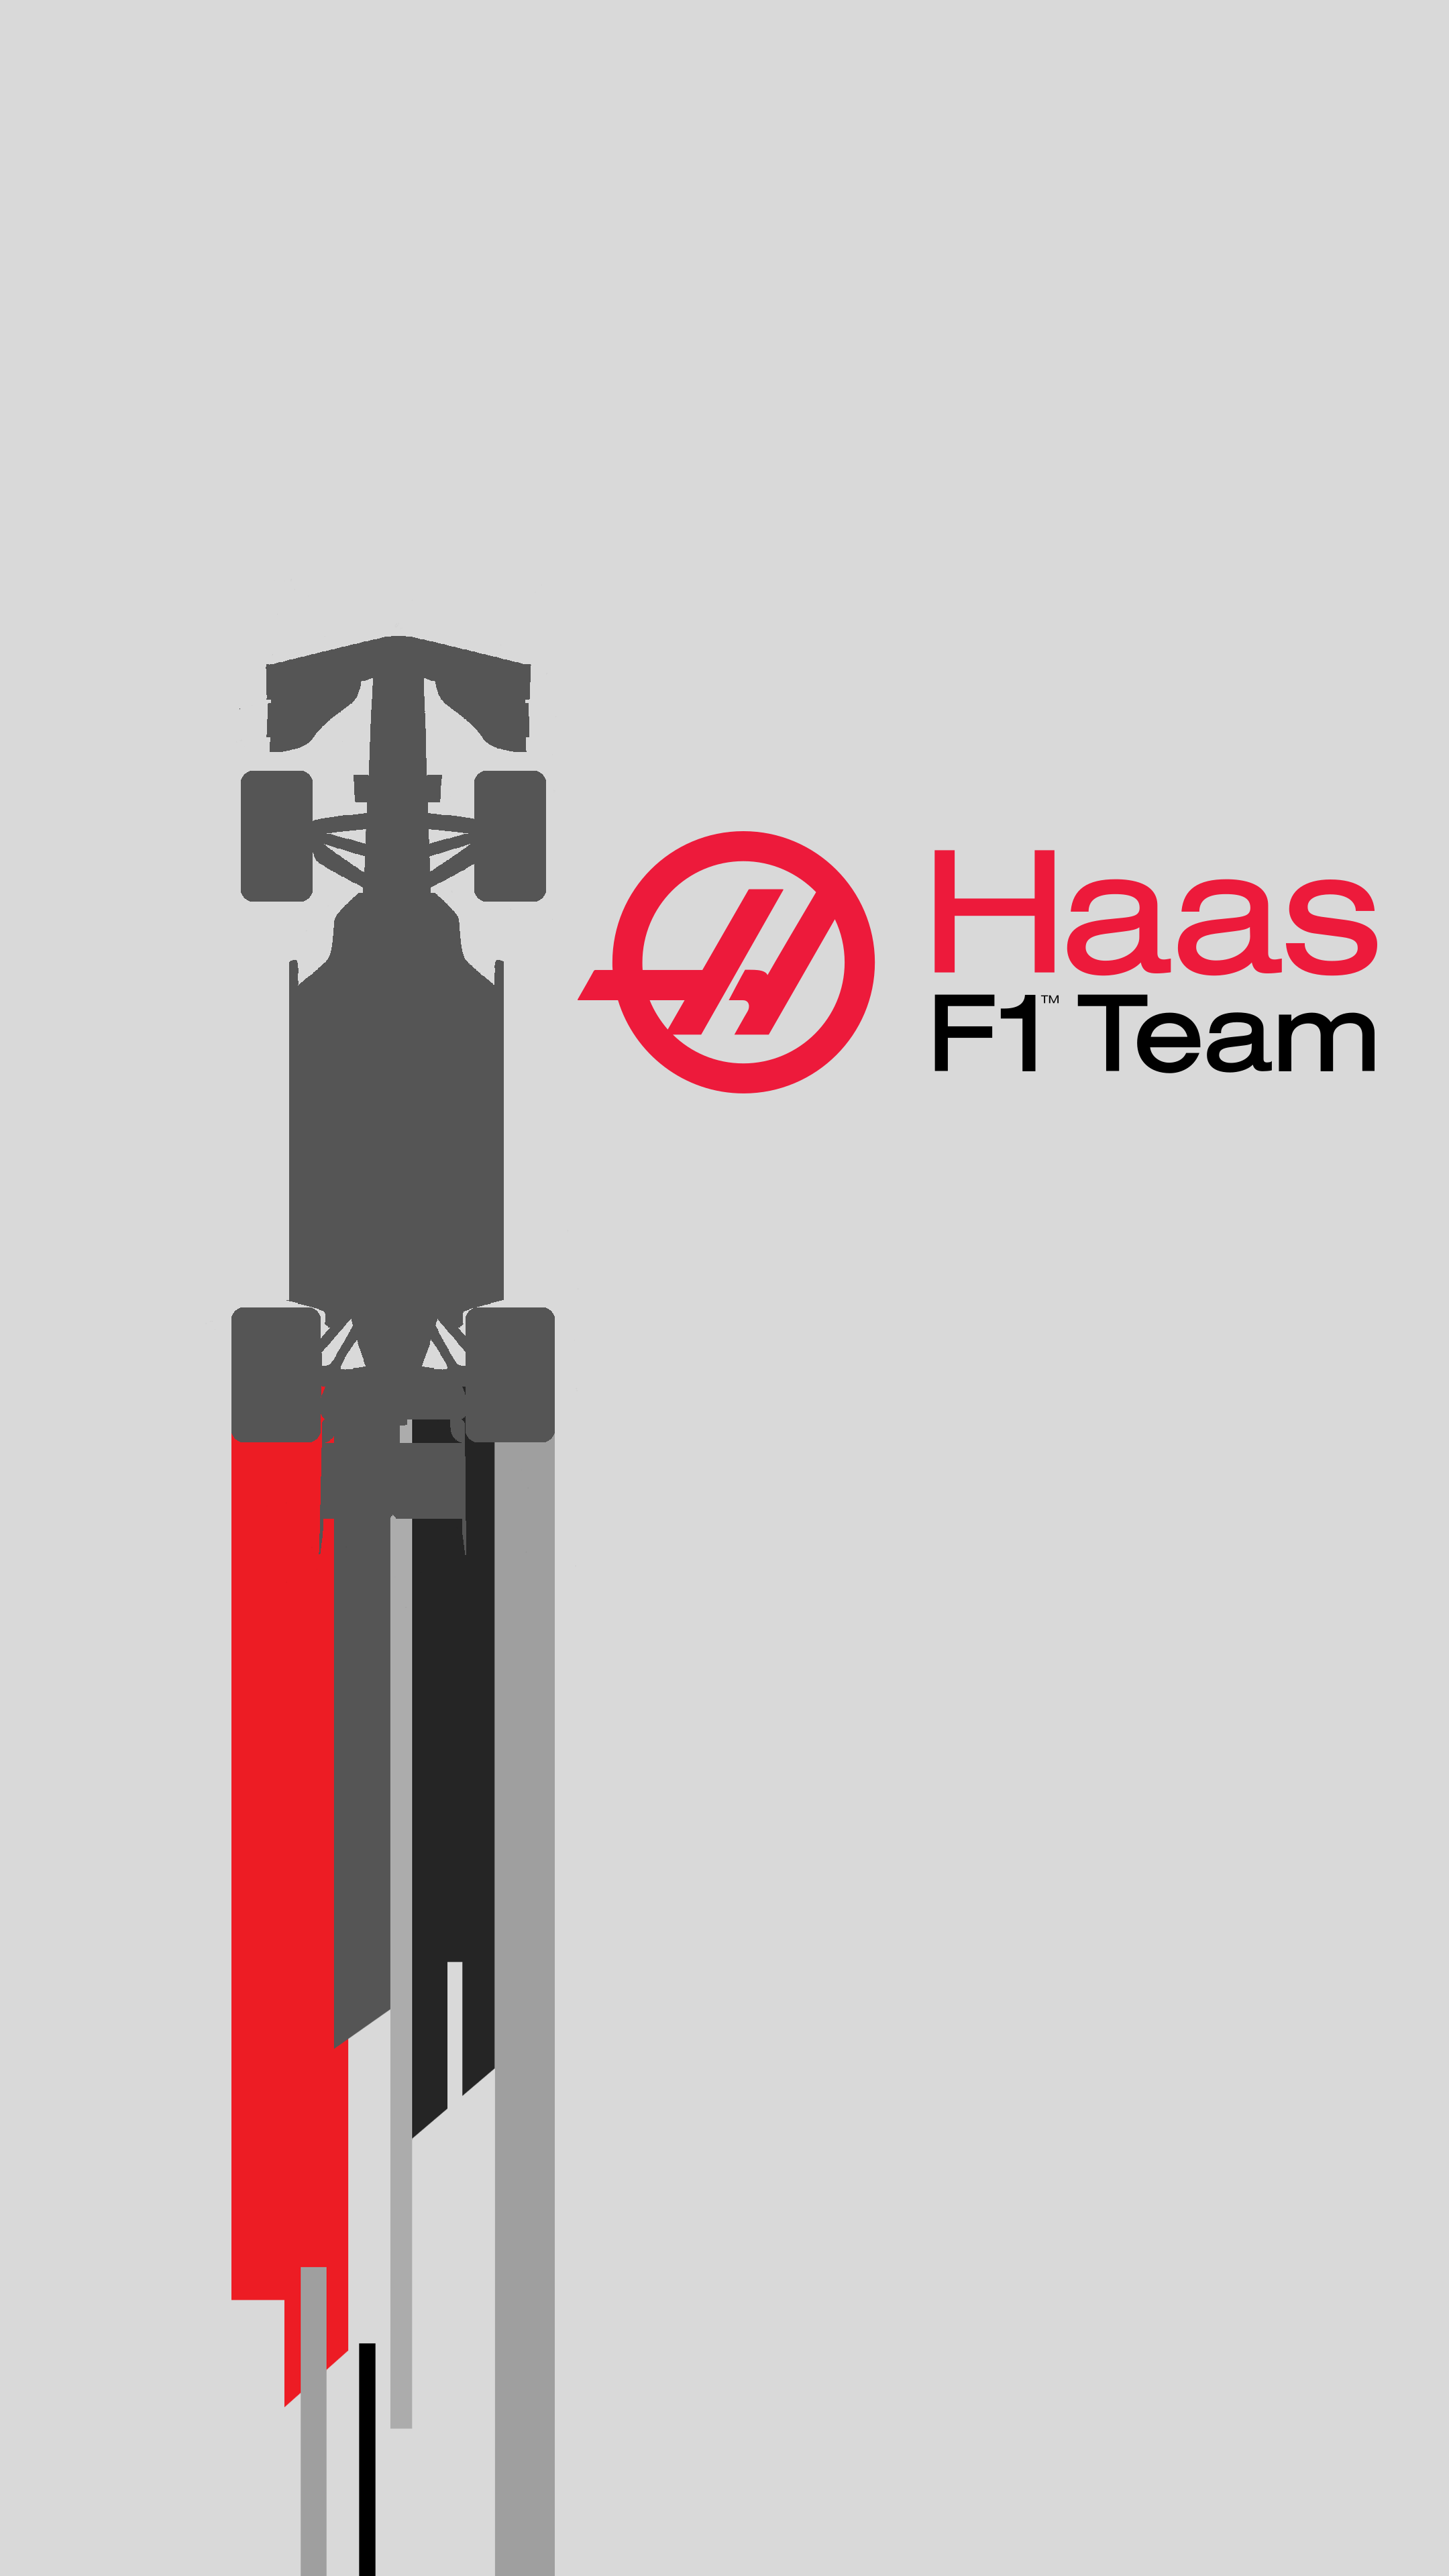 Williams and Haas F1 Phone Wallpaper I made